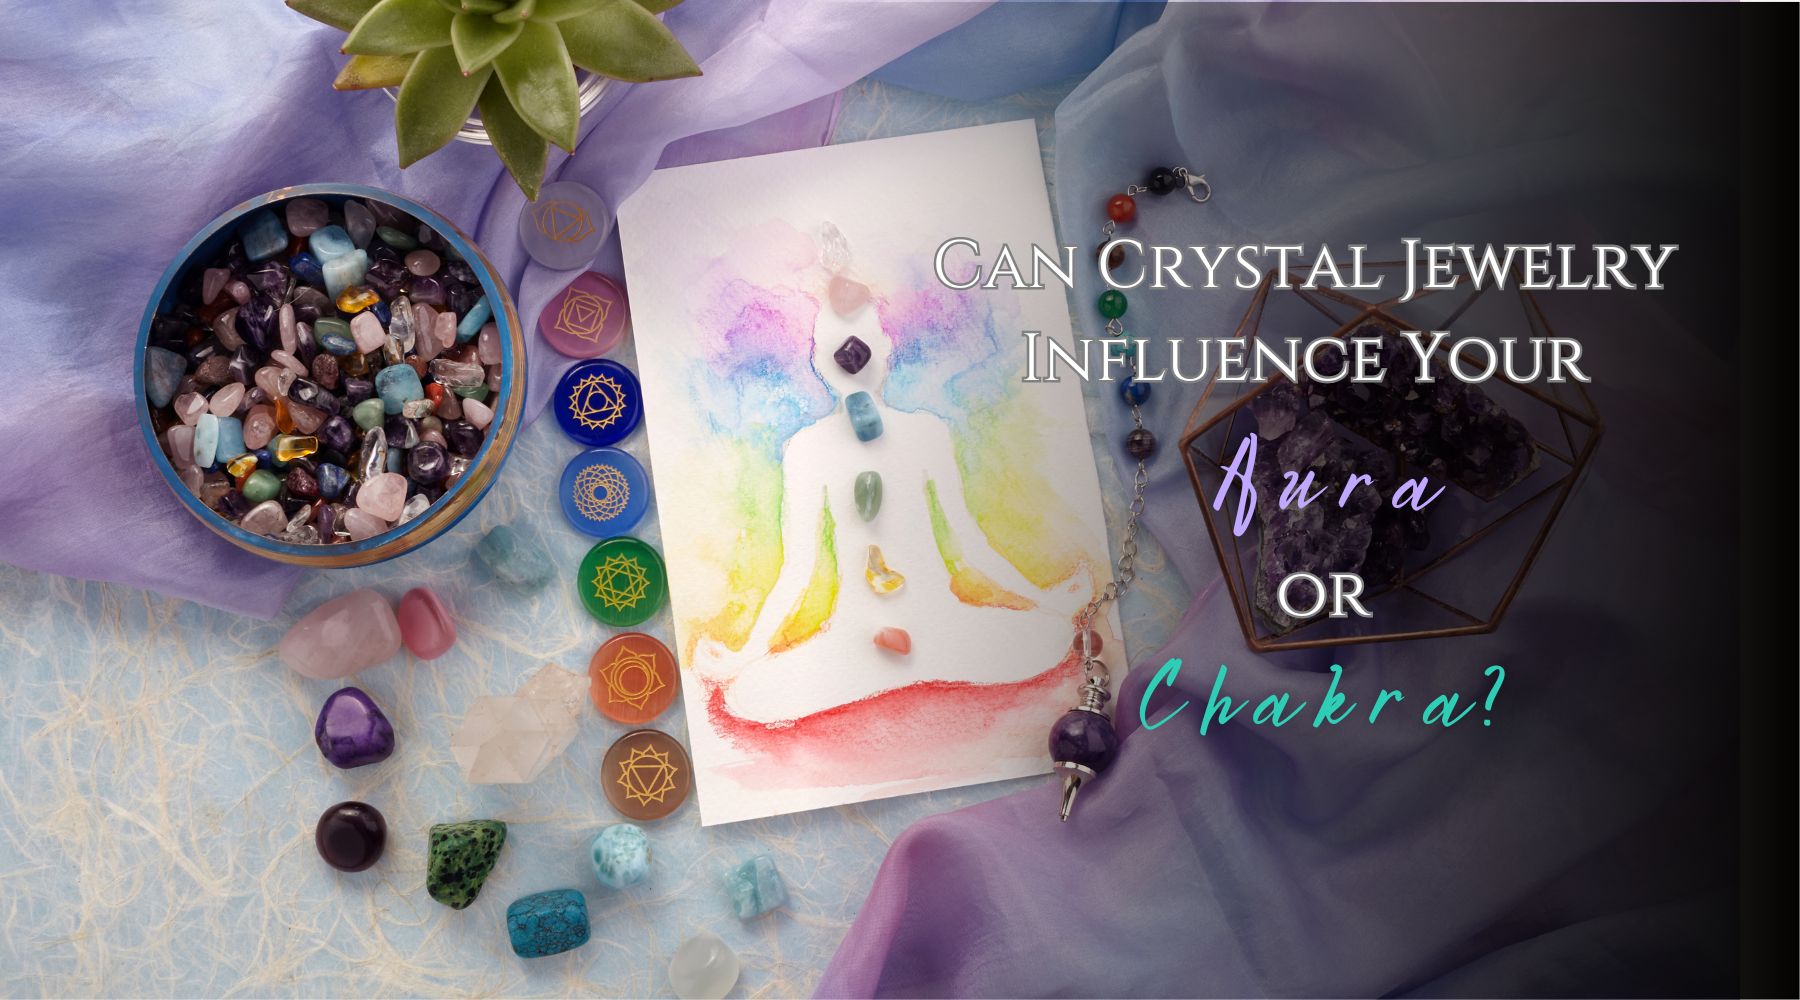 Can Crystal Jewelry Influence Your Aura or Chakra?